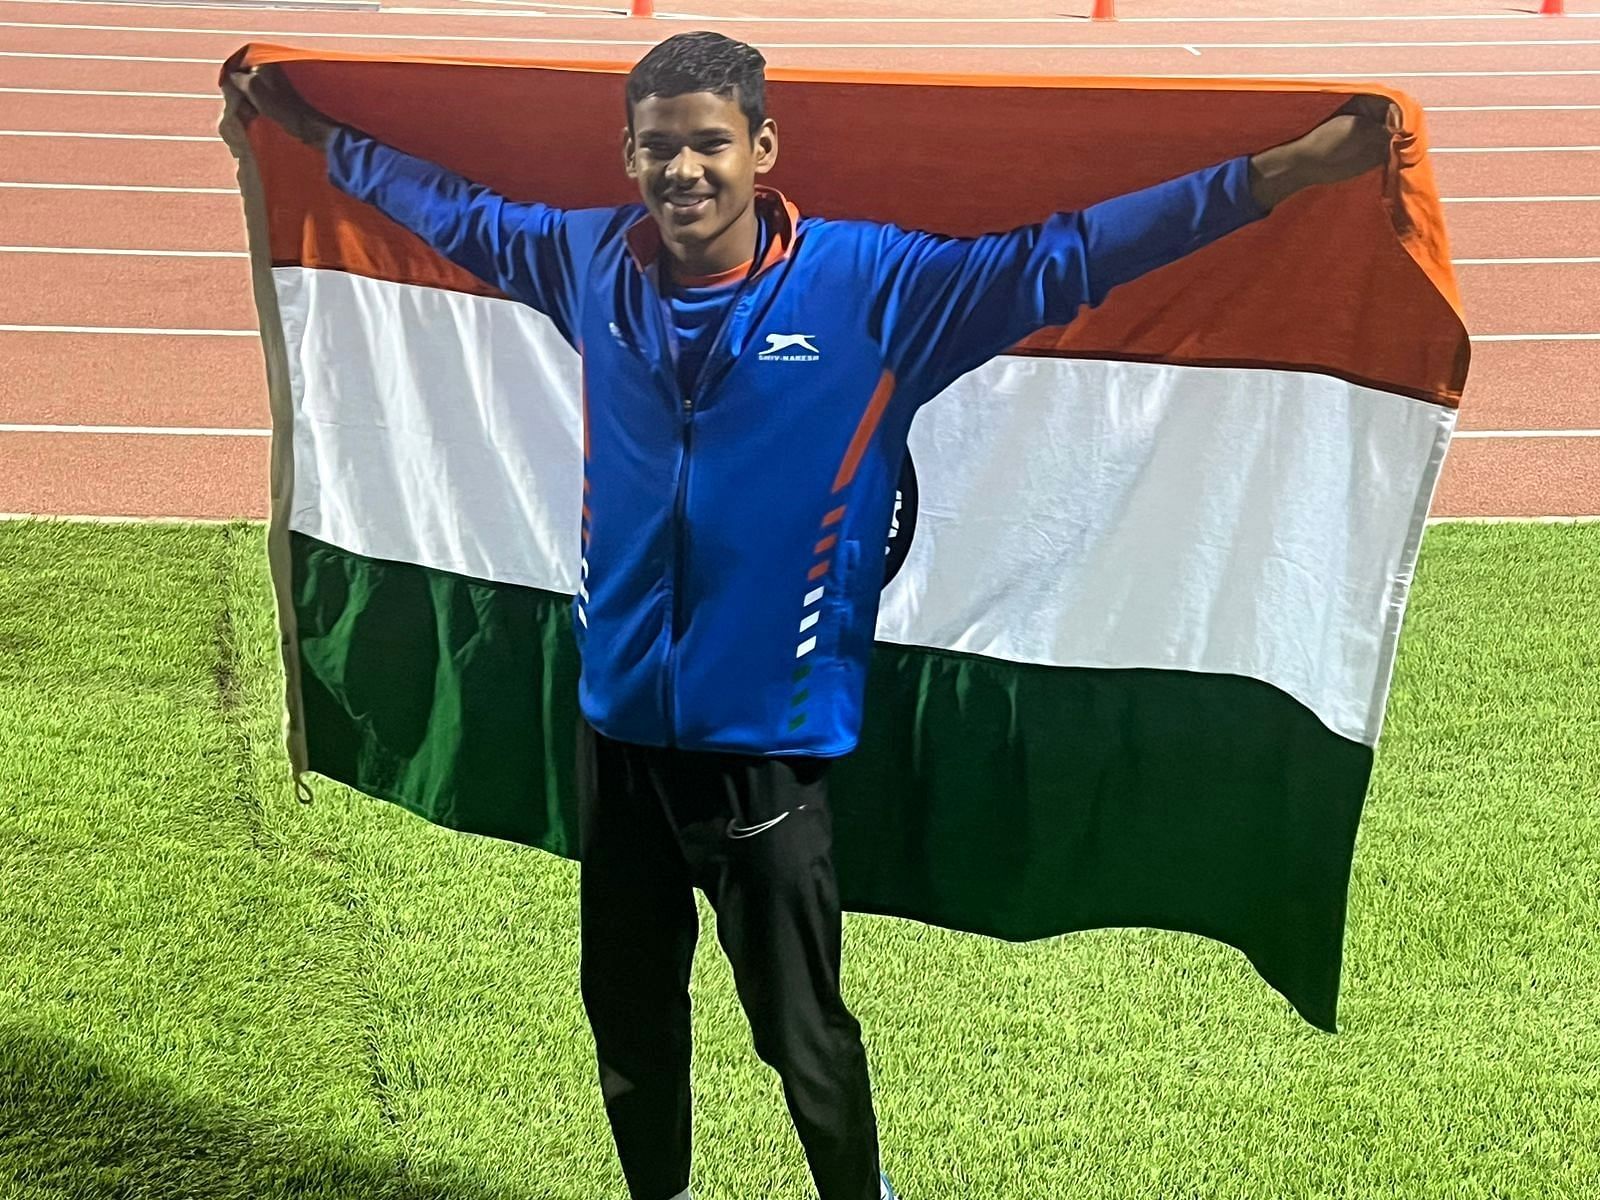 India&rsquo;s Kuldeep Kumar won bronze medal in pole vault at the just concluded Asian Youth Athletics Championships held in Kuwait. Photo credit Kuldeep Kumar